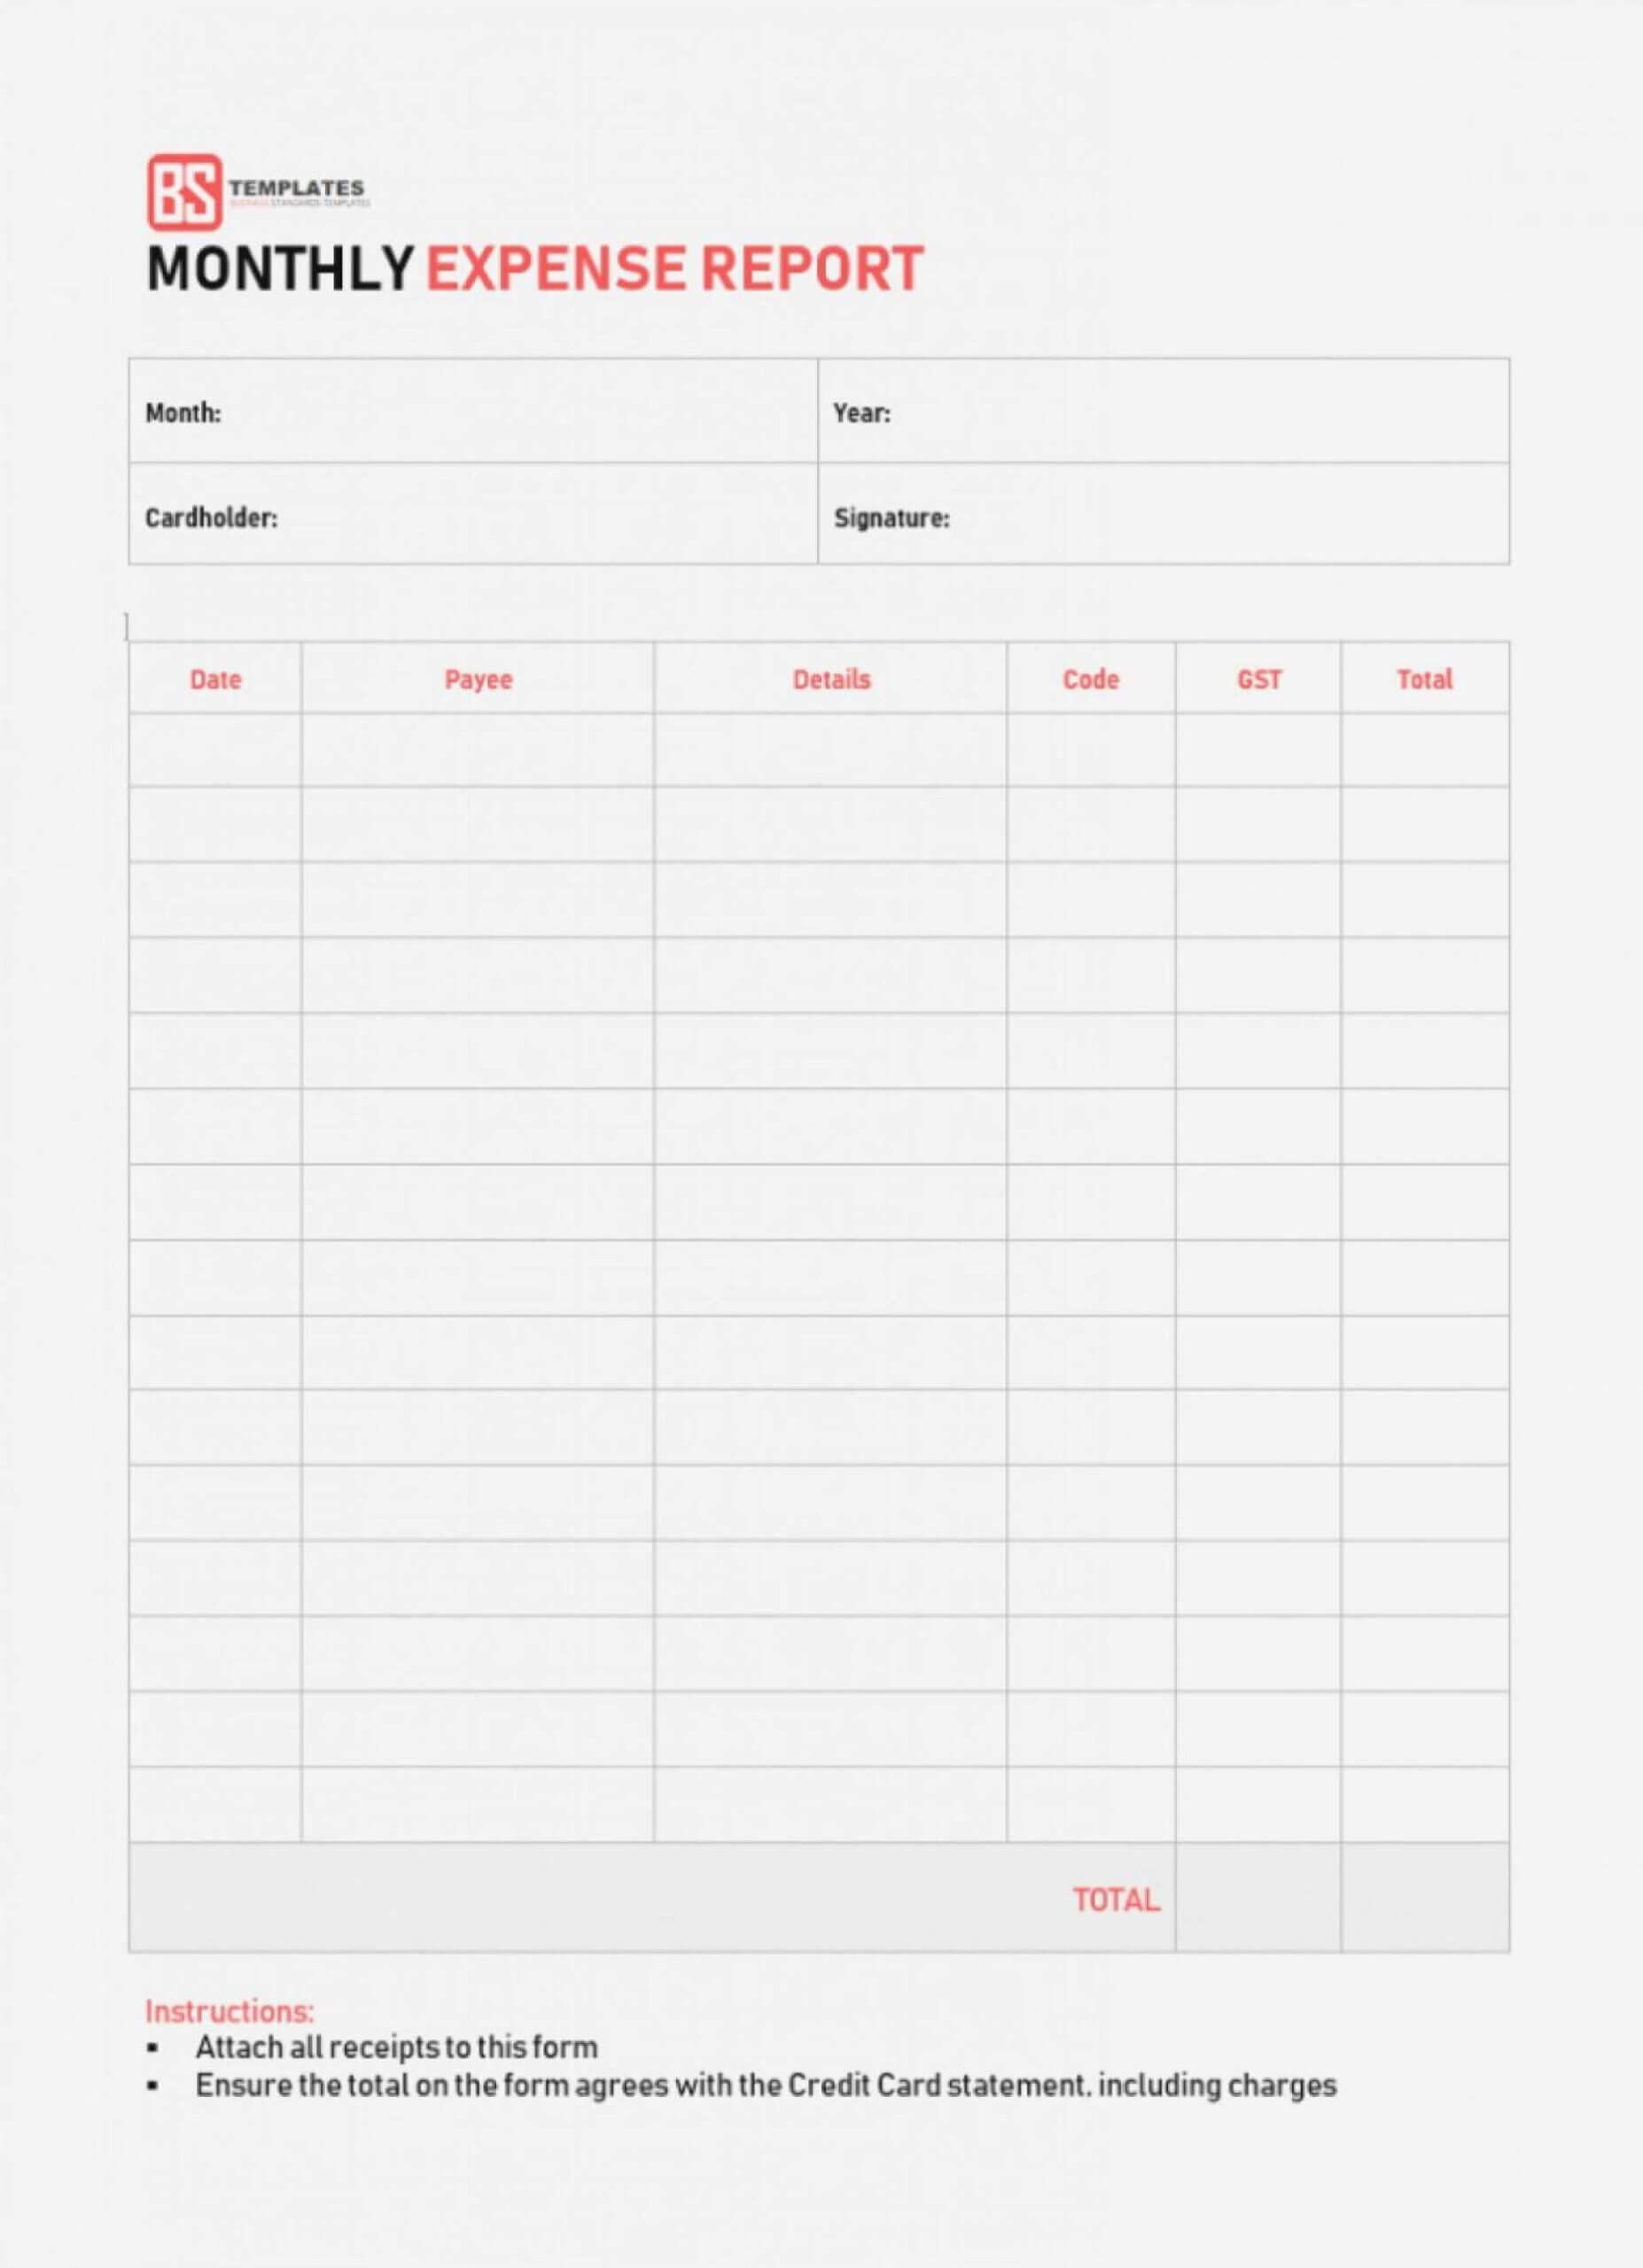 023 Template Ideas Expense Report Format Excel Templates With Regard To Expense Report Template Xls